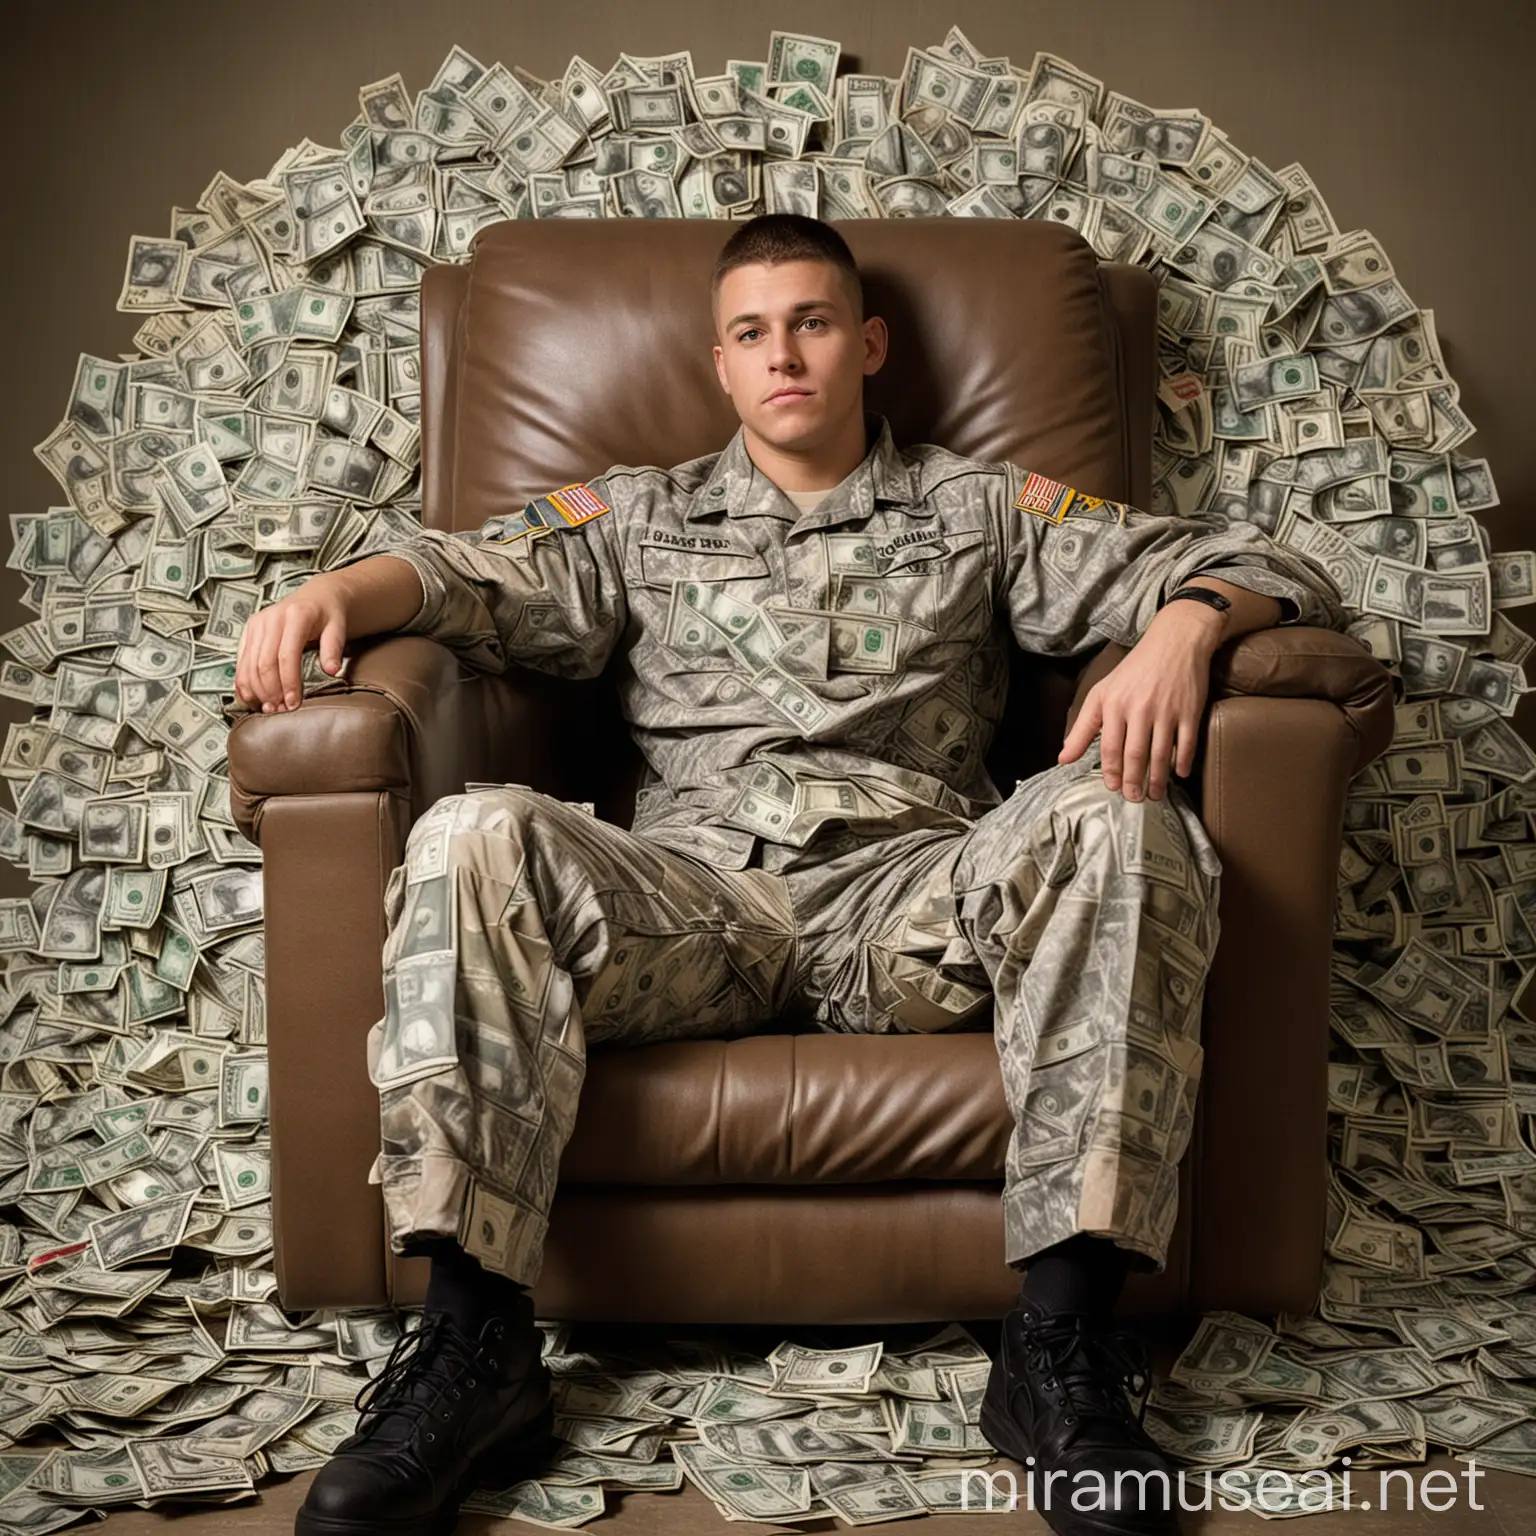 US Army Soldier Surrounded by Wealth and Junk Food